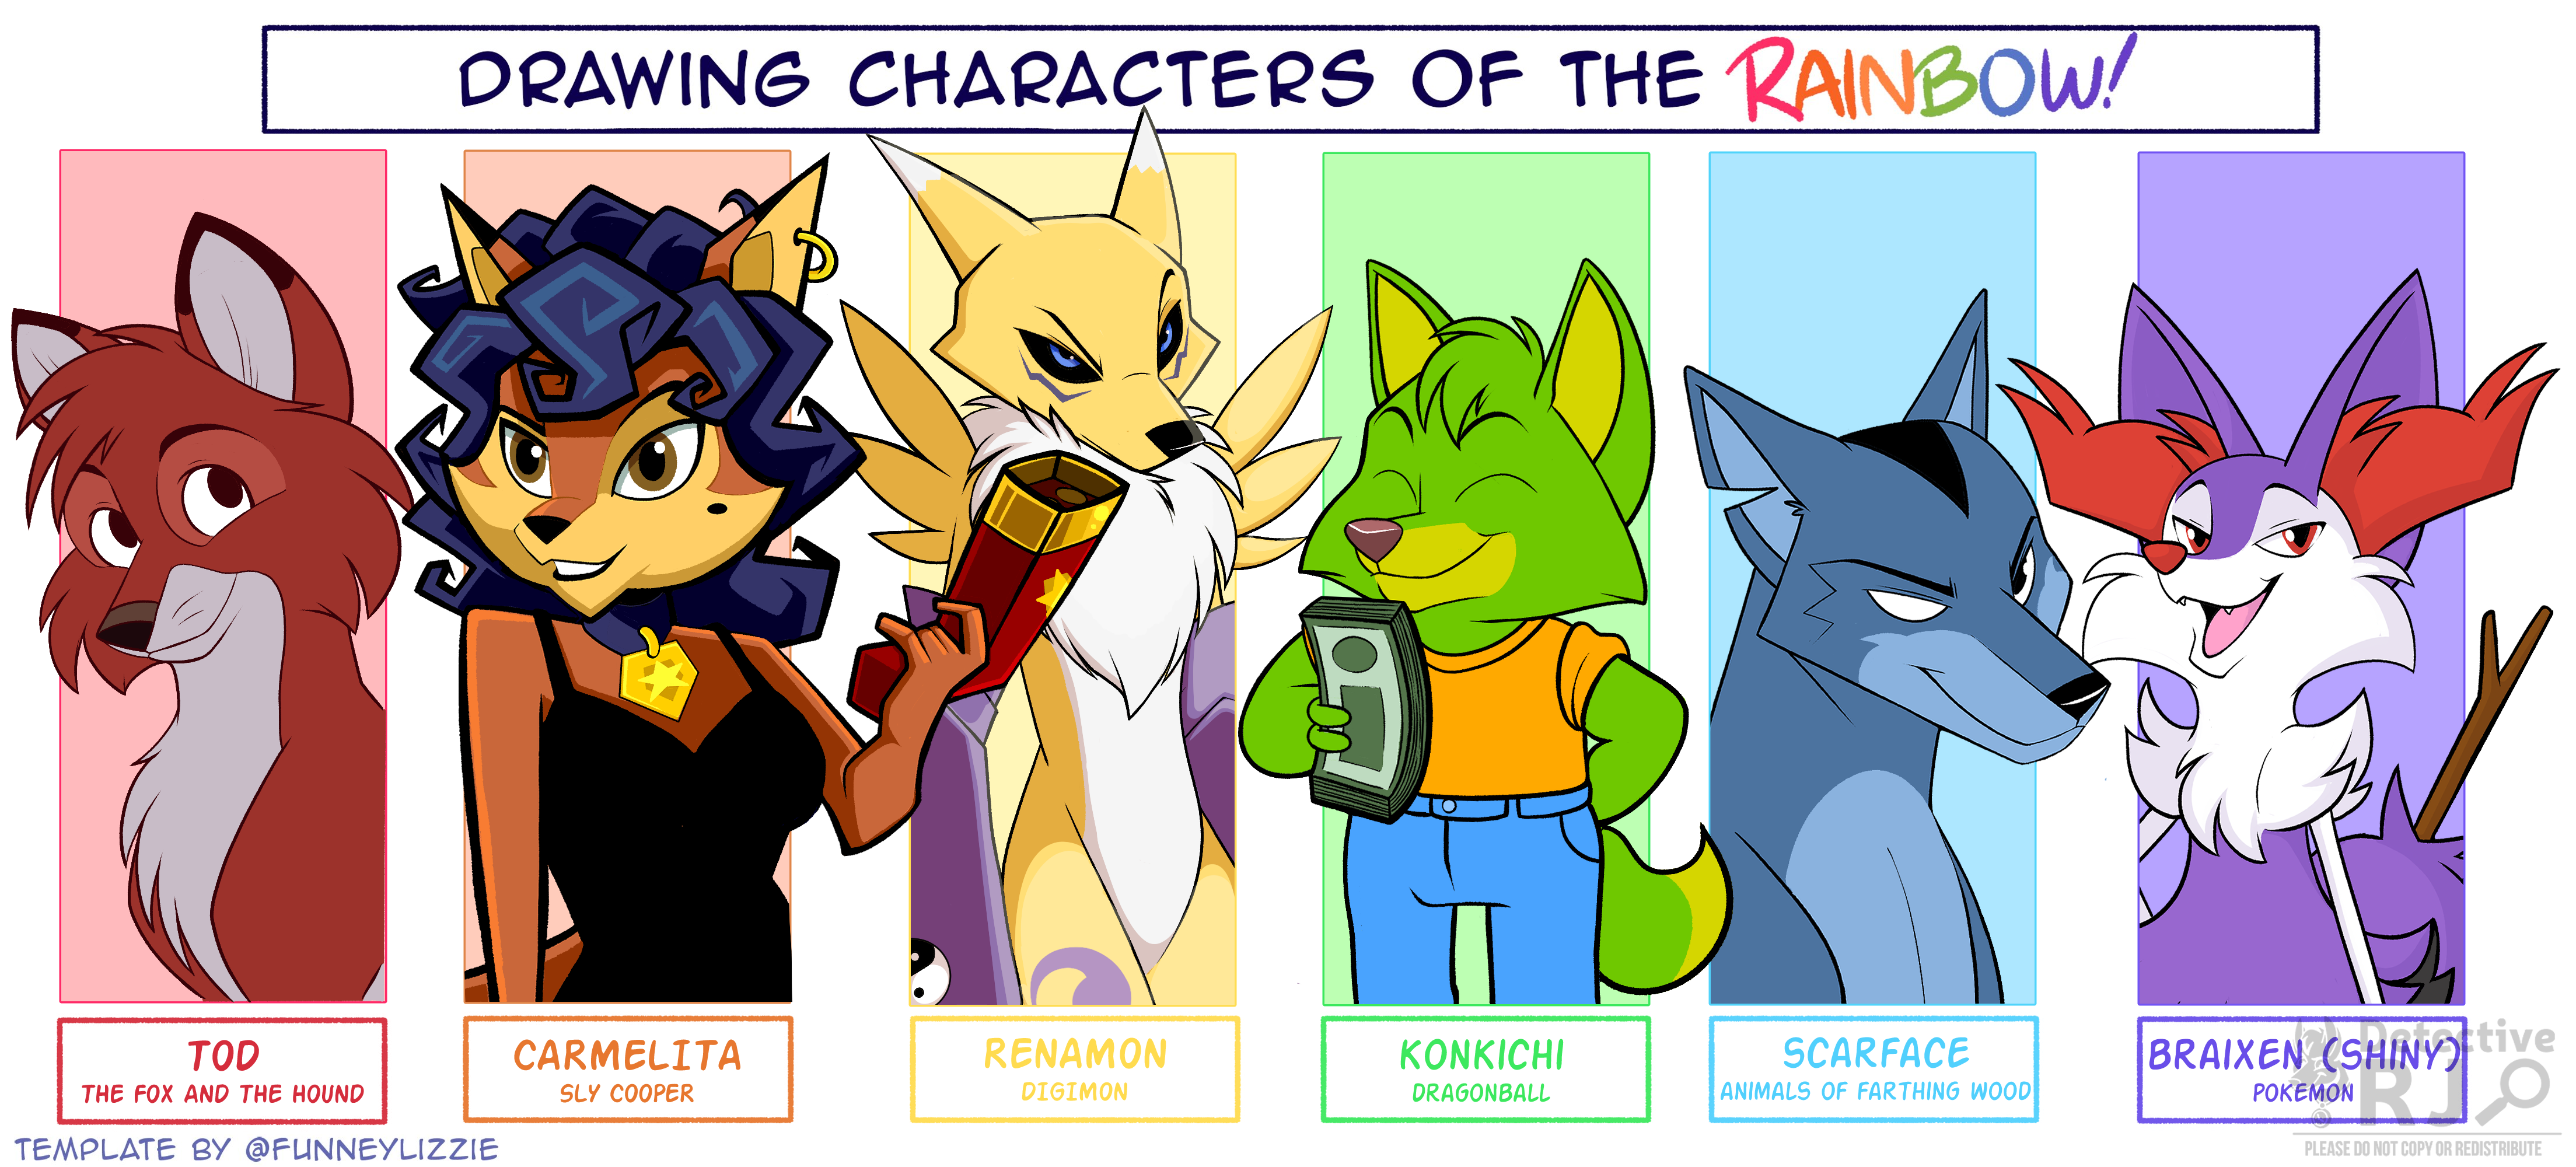 Characters of the Rainbow: Fox Edition